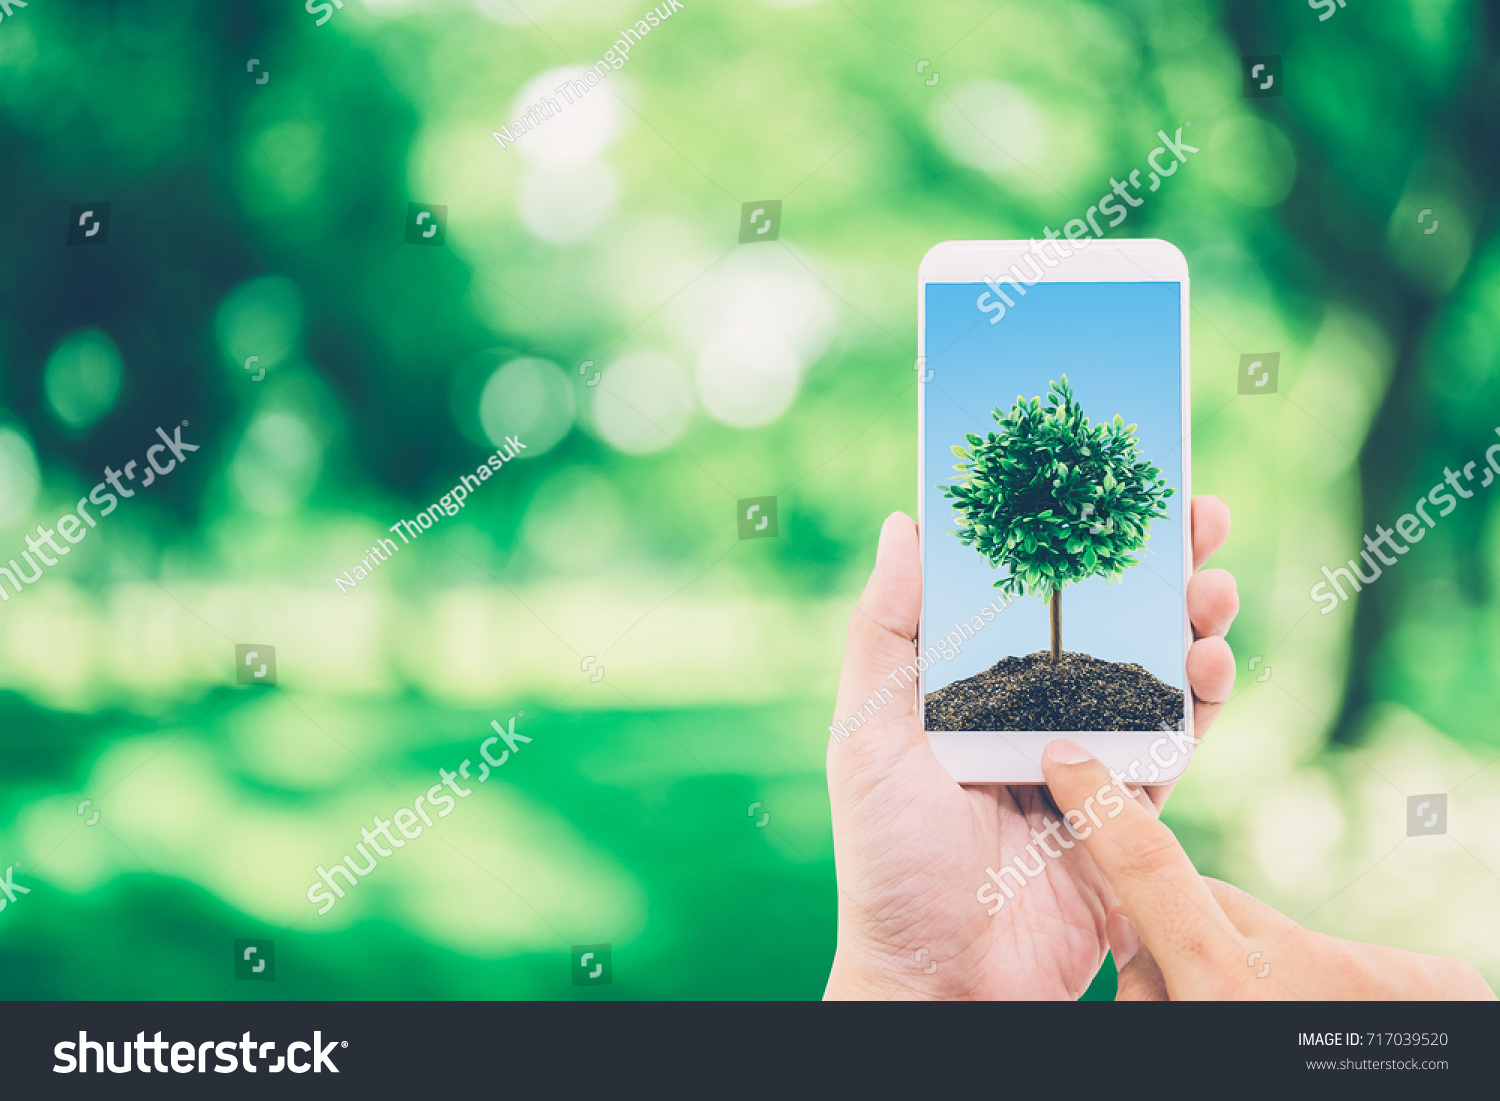 Hand of man holding mobile phone with soil and tree on screen, environment concept. #717039520